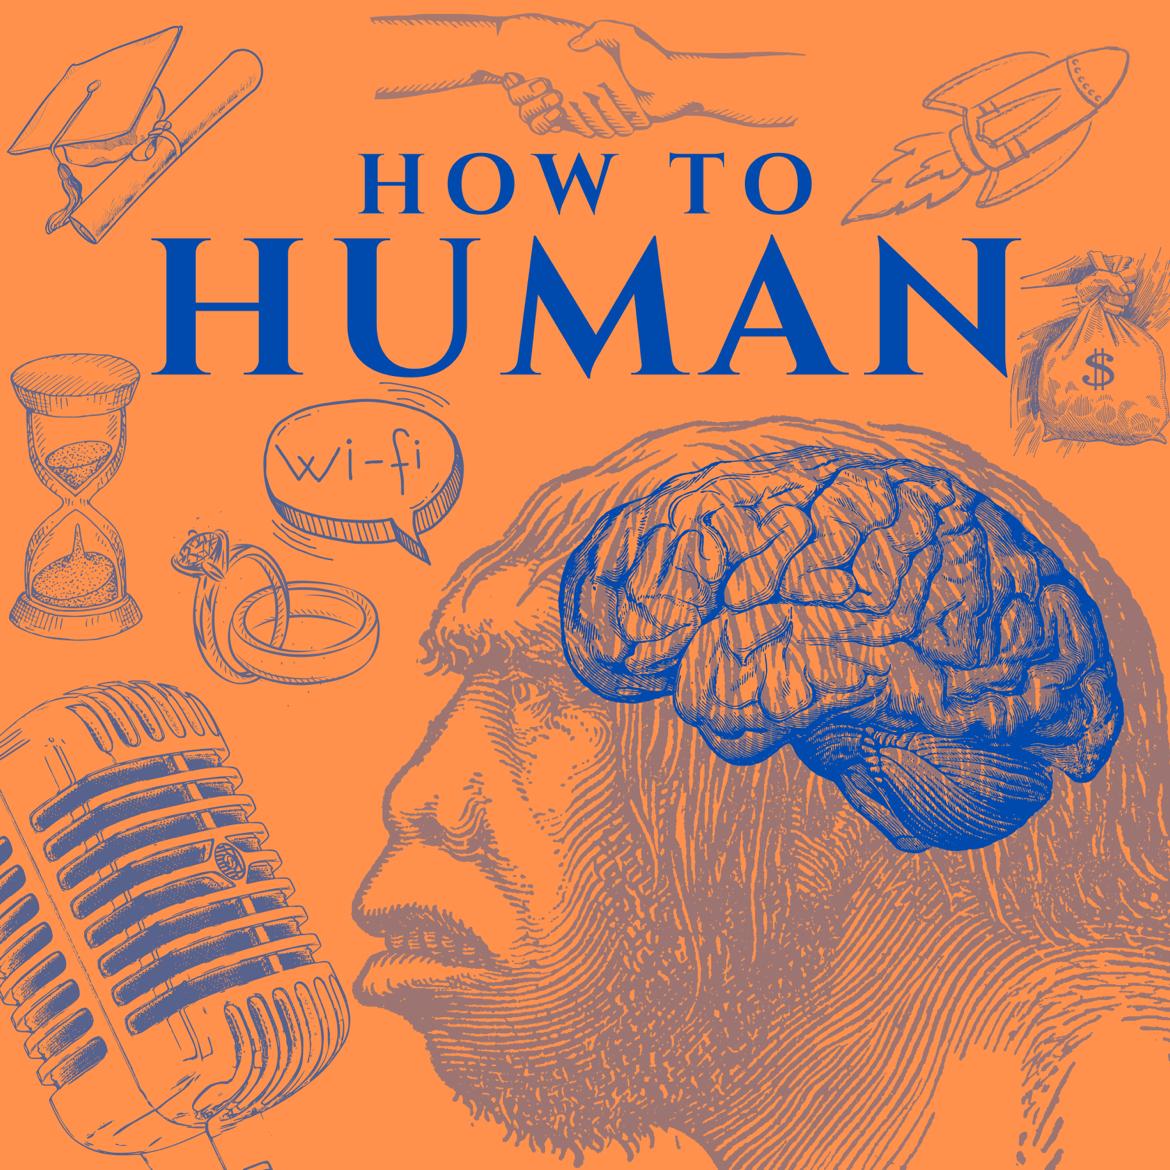 How To Human's images